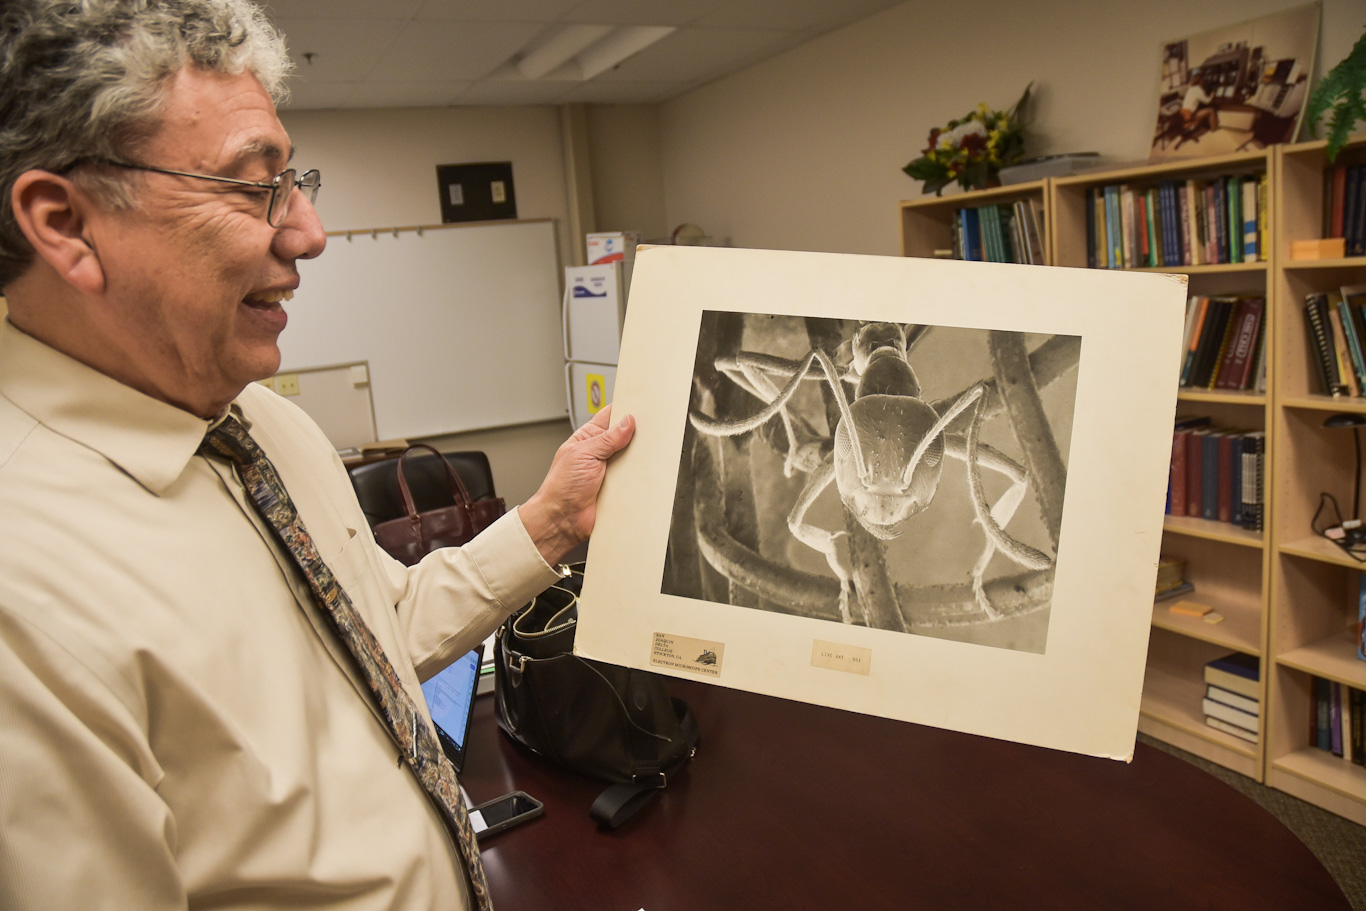 San Joaquin Delta College electron microscopy Professor Frank Villalovoz holds an image of an ant that was created by Thomas Deerinck when he was a student at Delta more than 40 years ago.